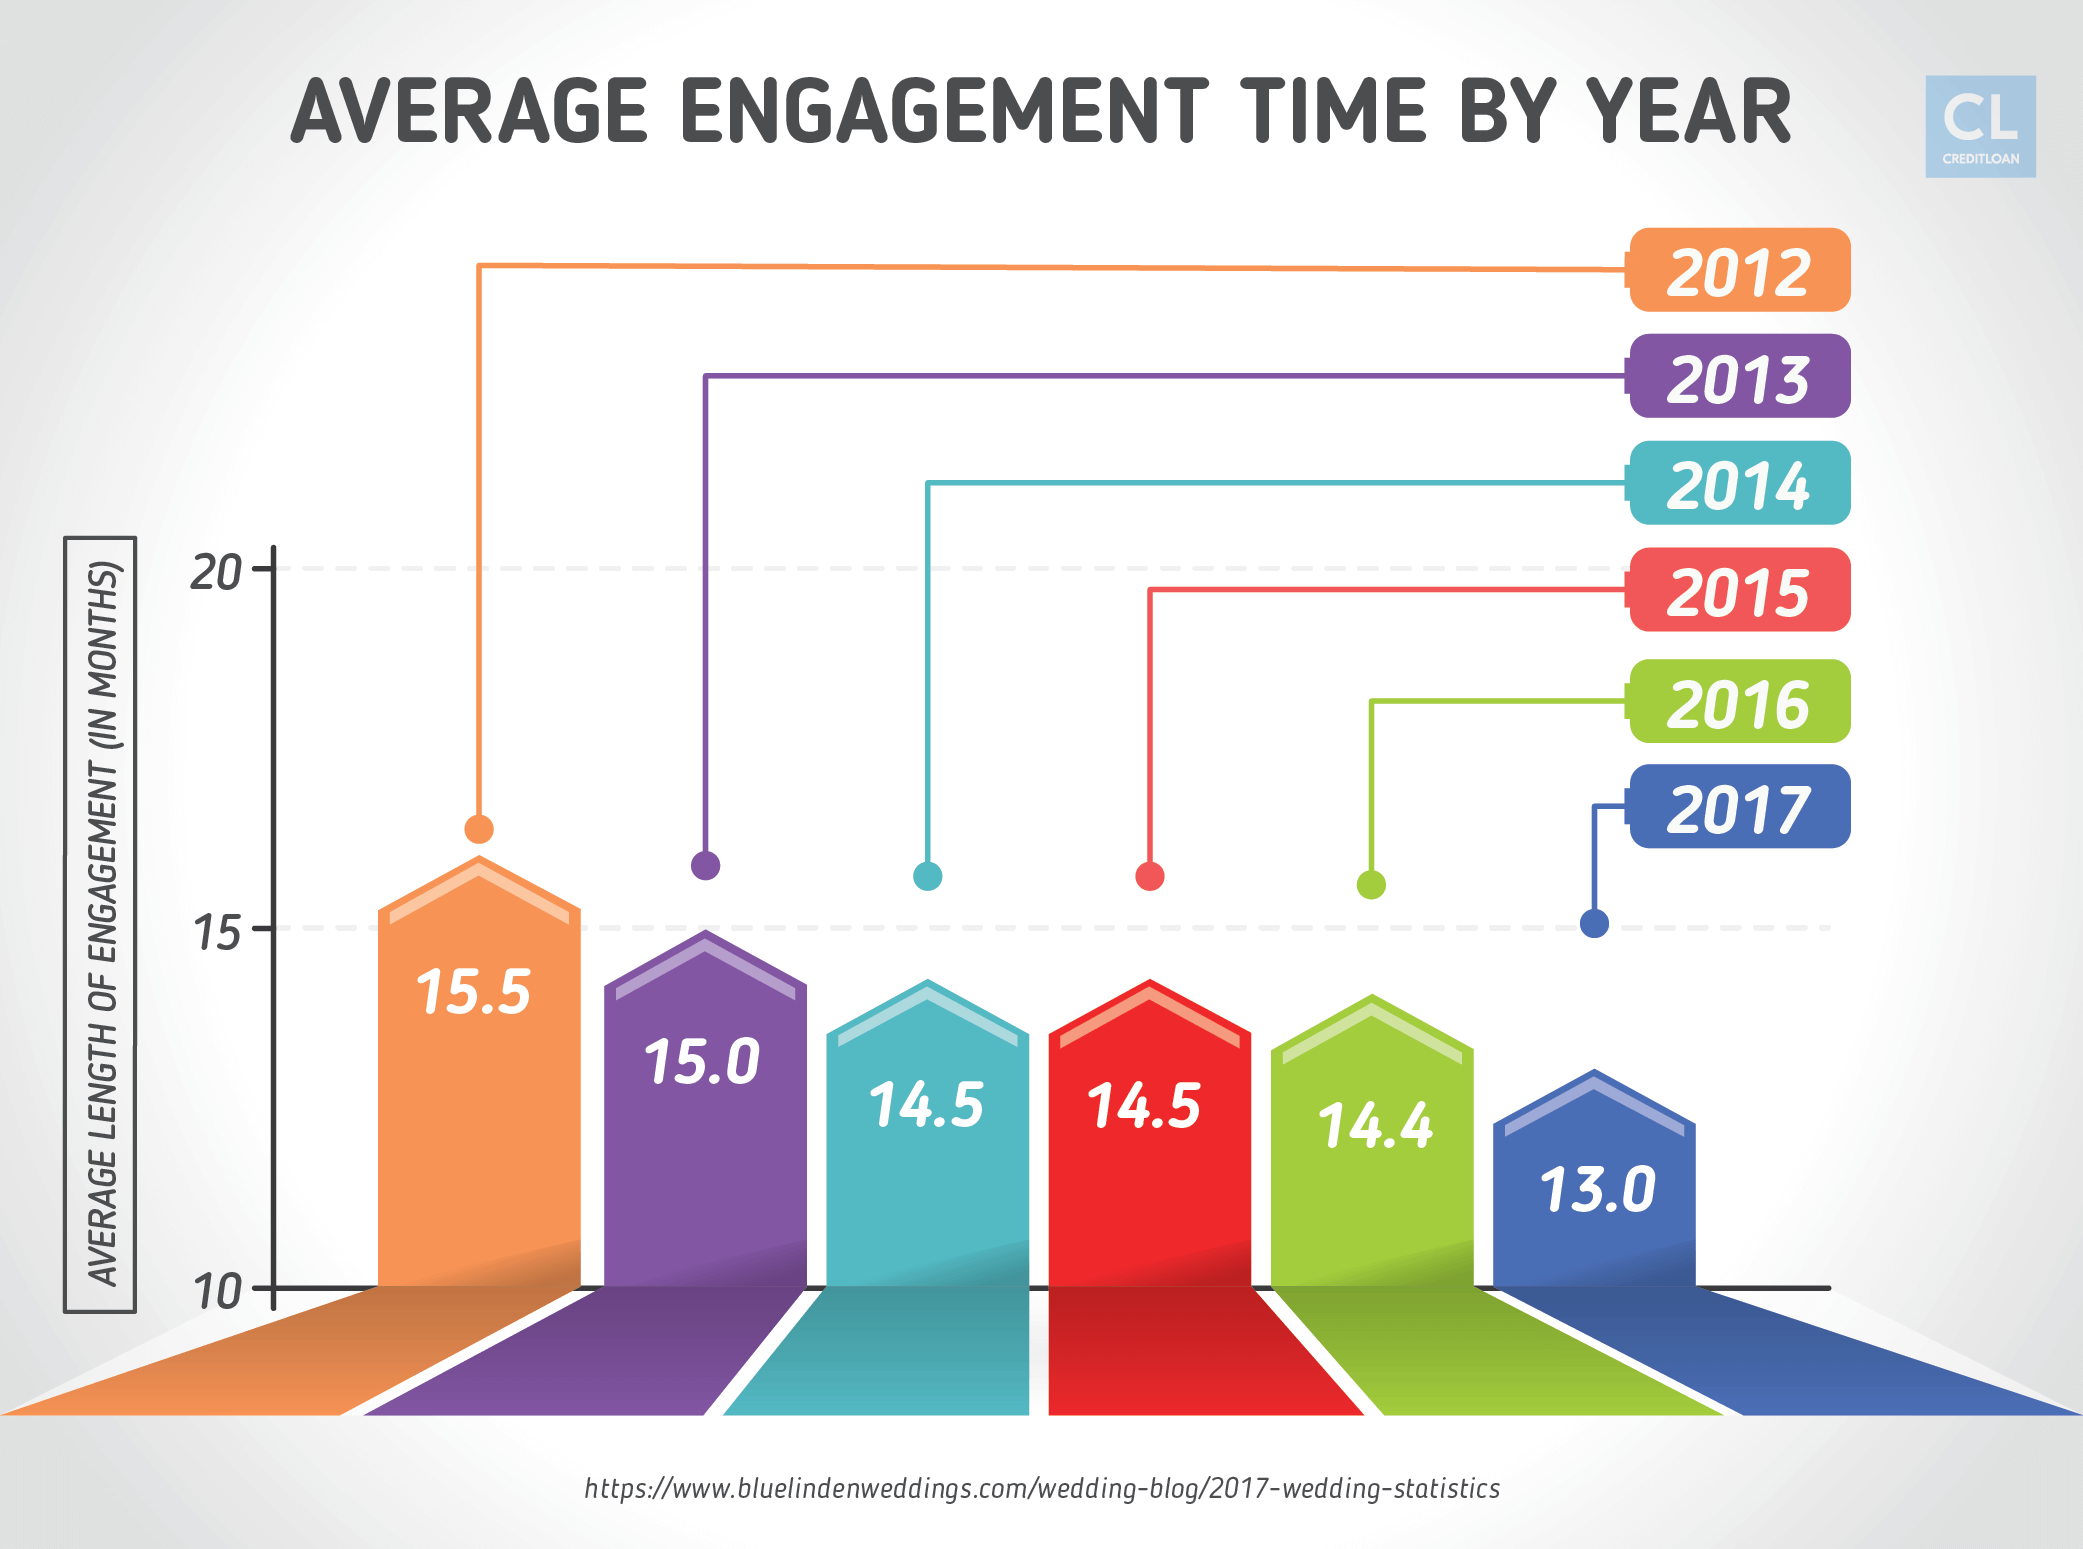 Average Engagement Time from 2012-2017